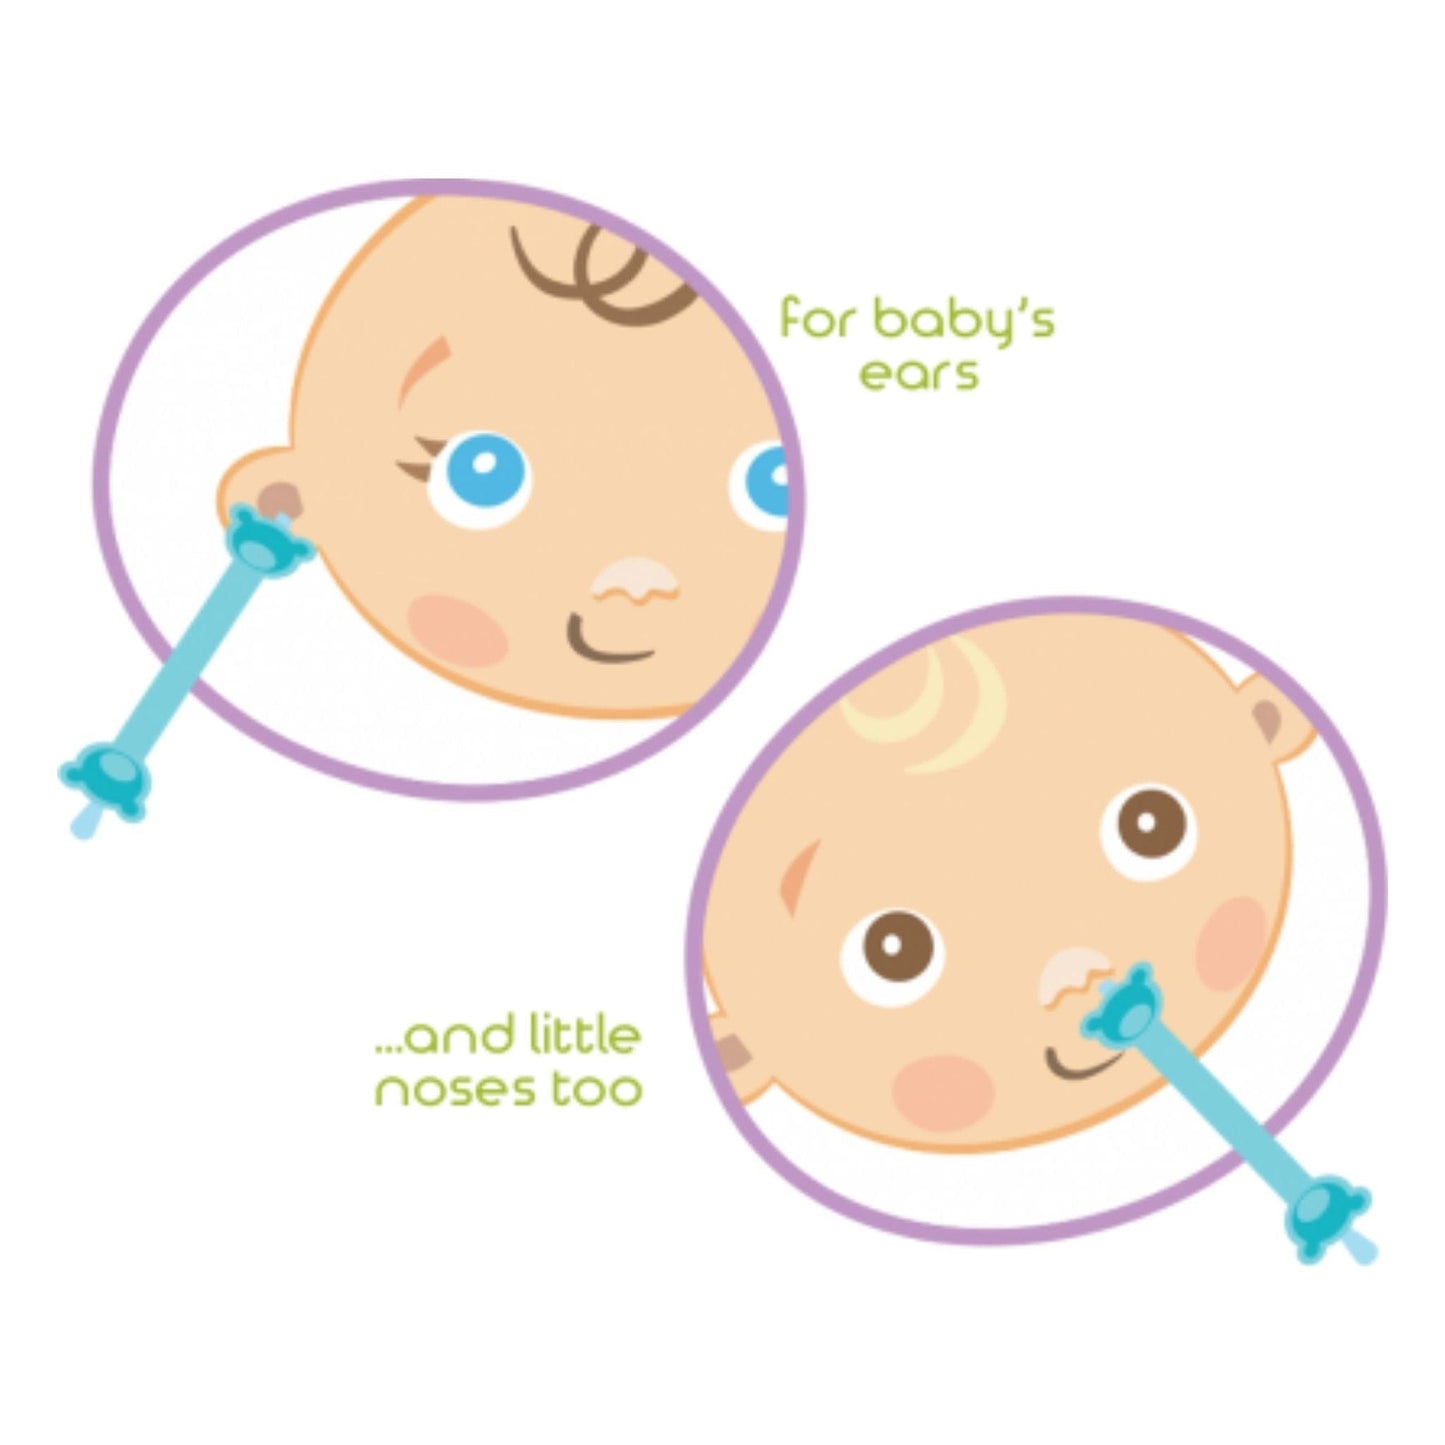 Oogiebear 2 in 1 Baby Nose & Ear Cleaner 2 Pack Oogiebear 2 in 1 Baby Nose & Ear Cleaner 2 Pack 